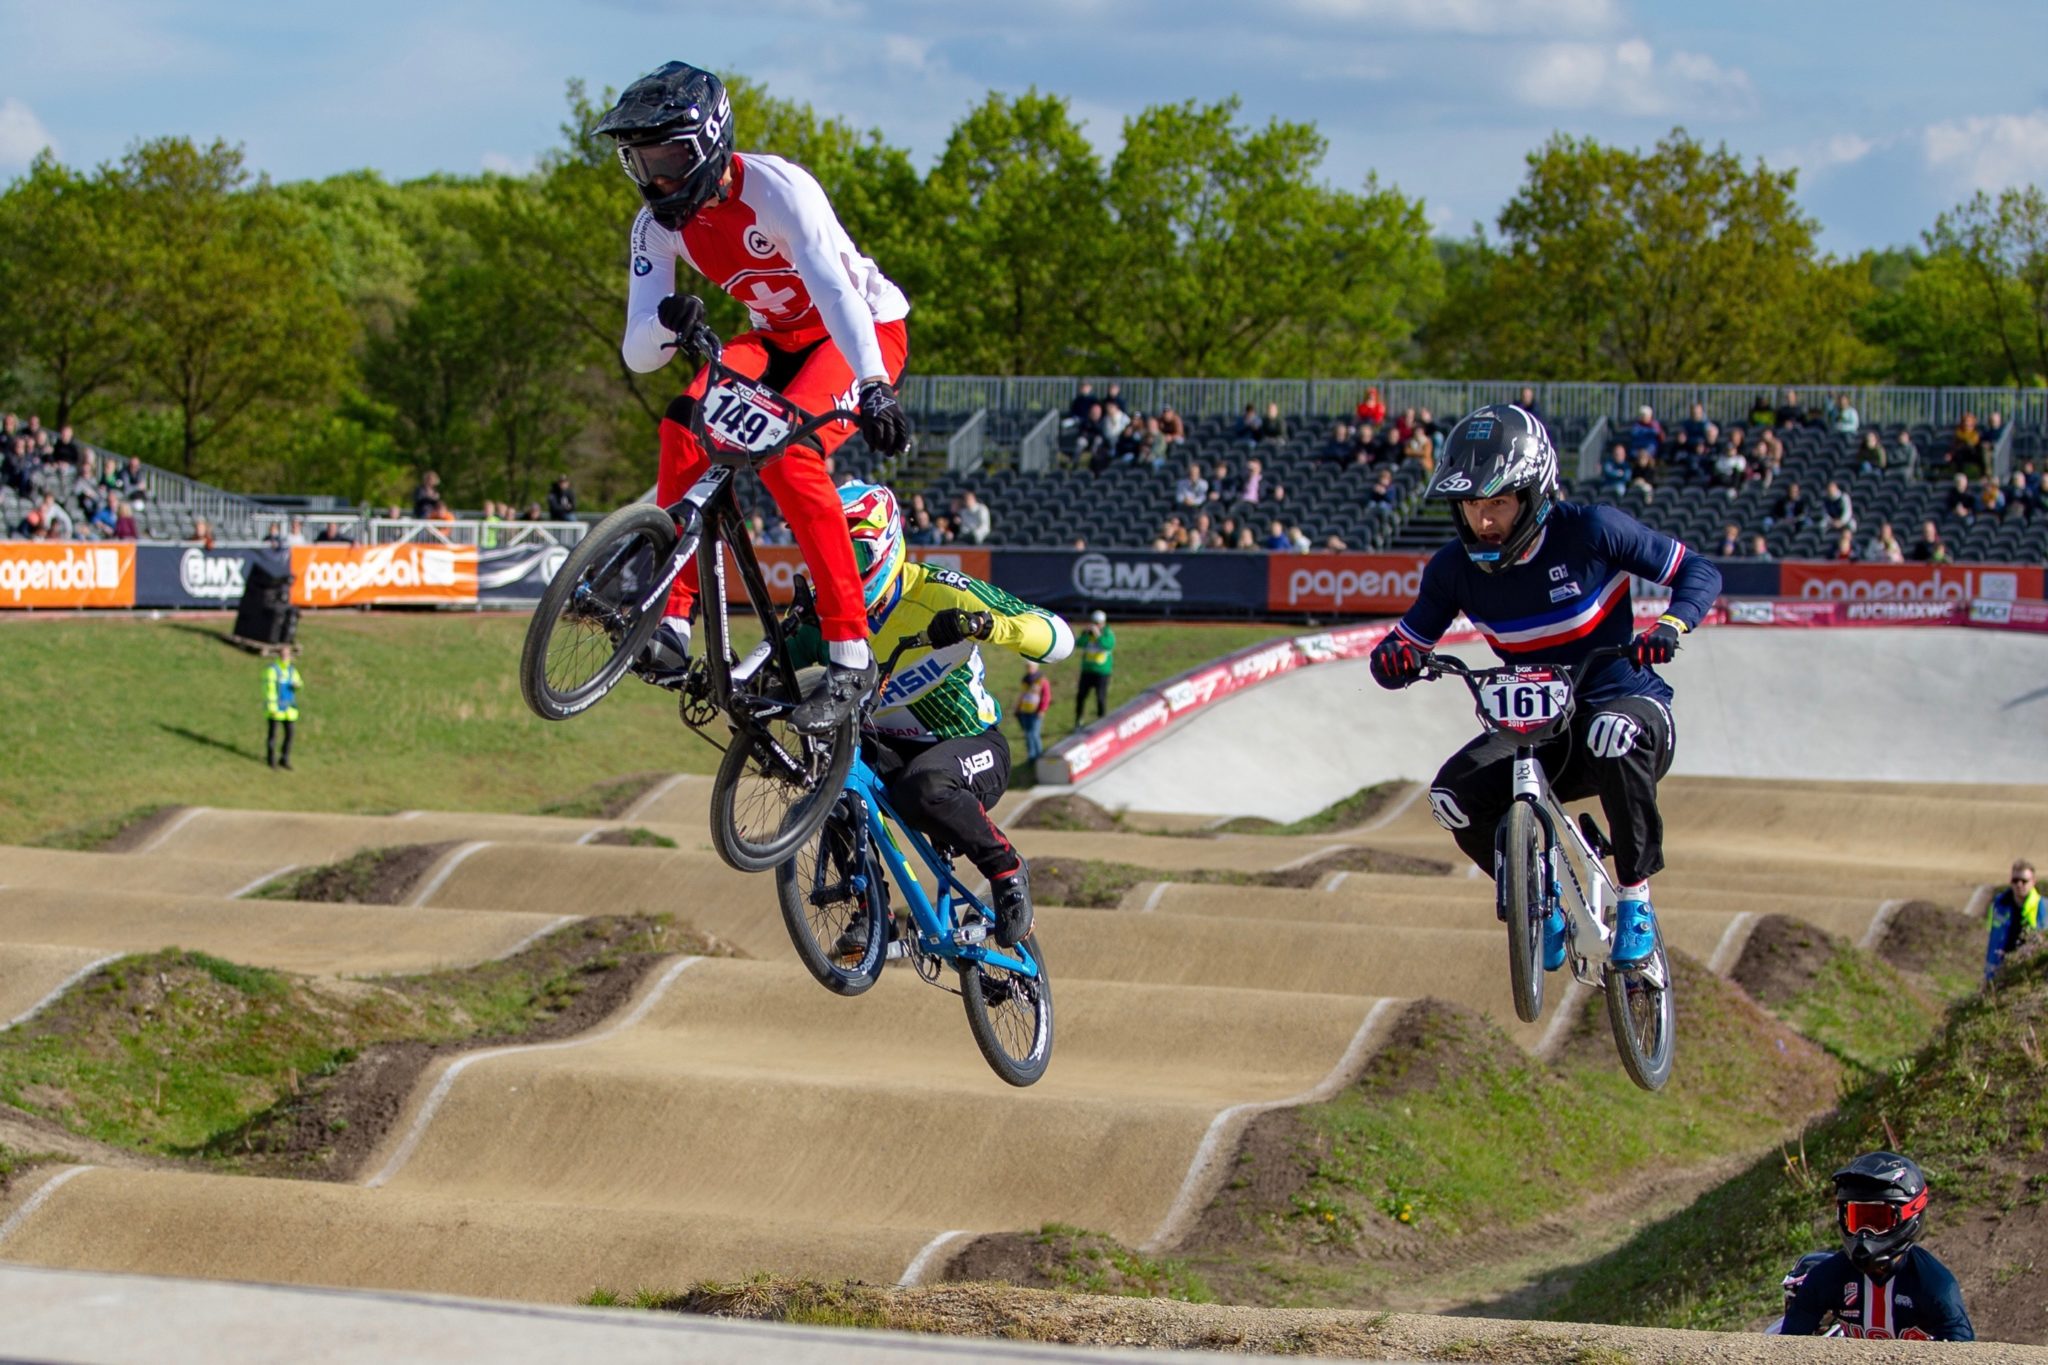 2019 UCI SX BMX
Rounds 3&4
Papendal, the Netherlands